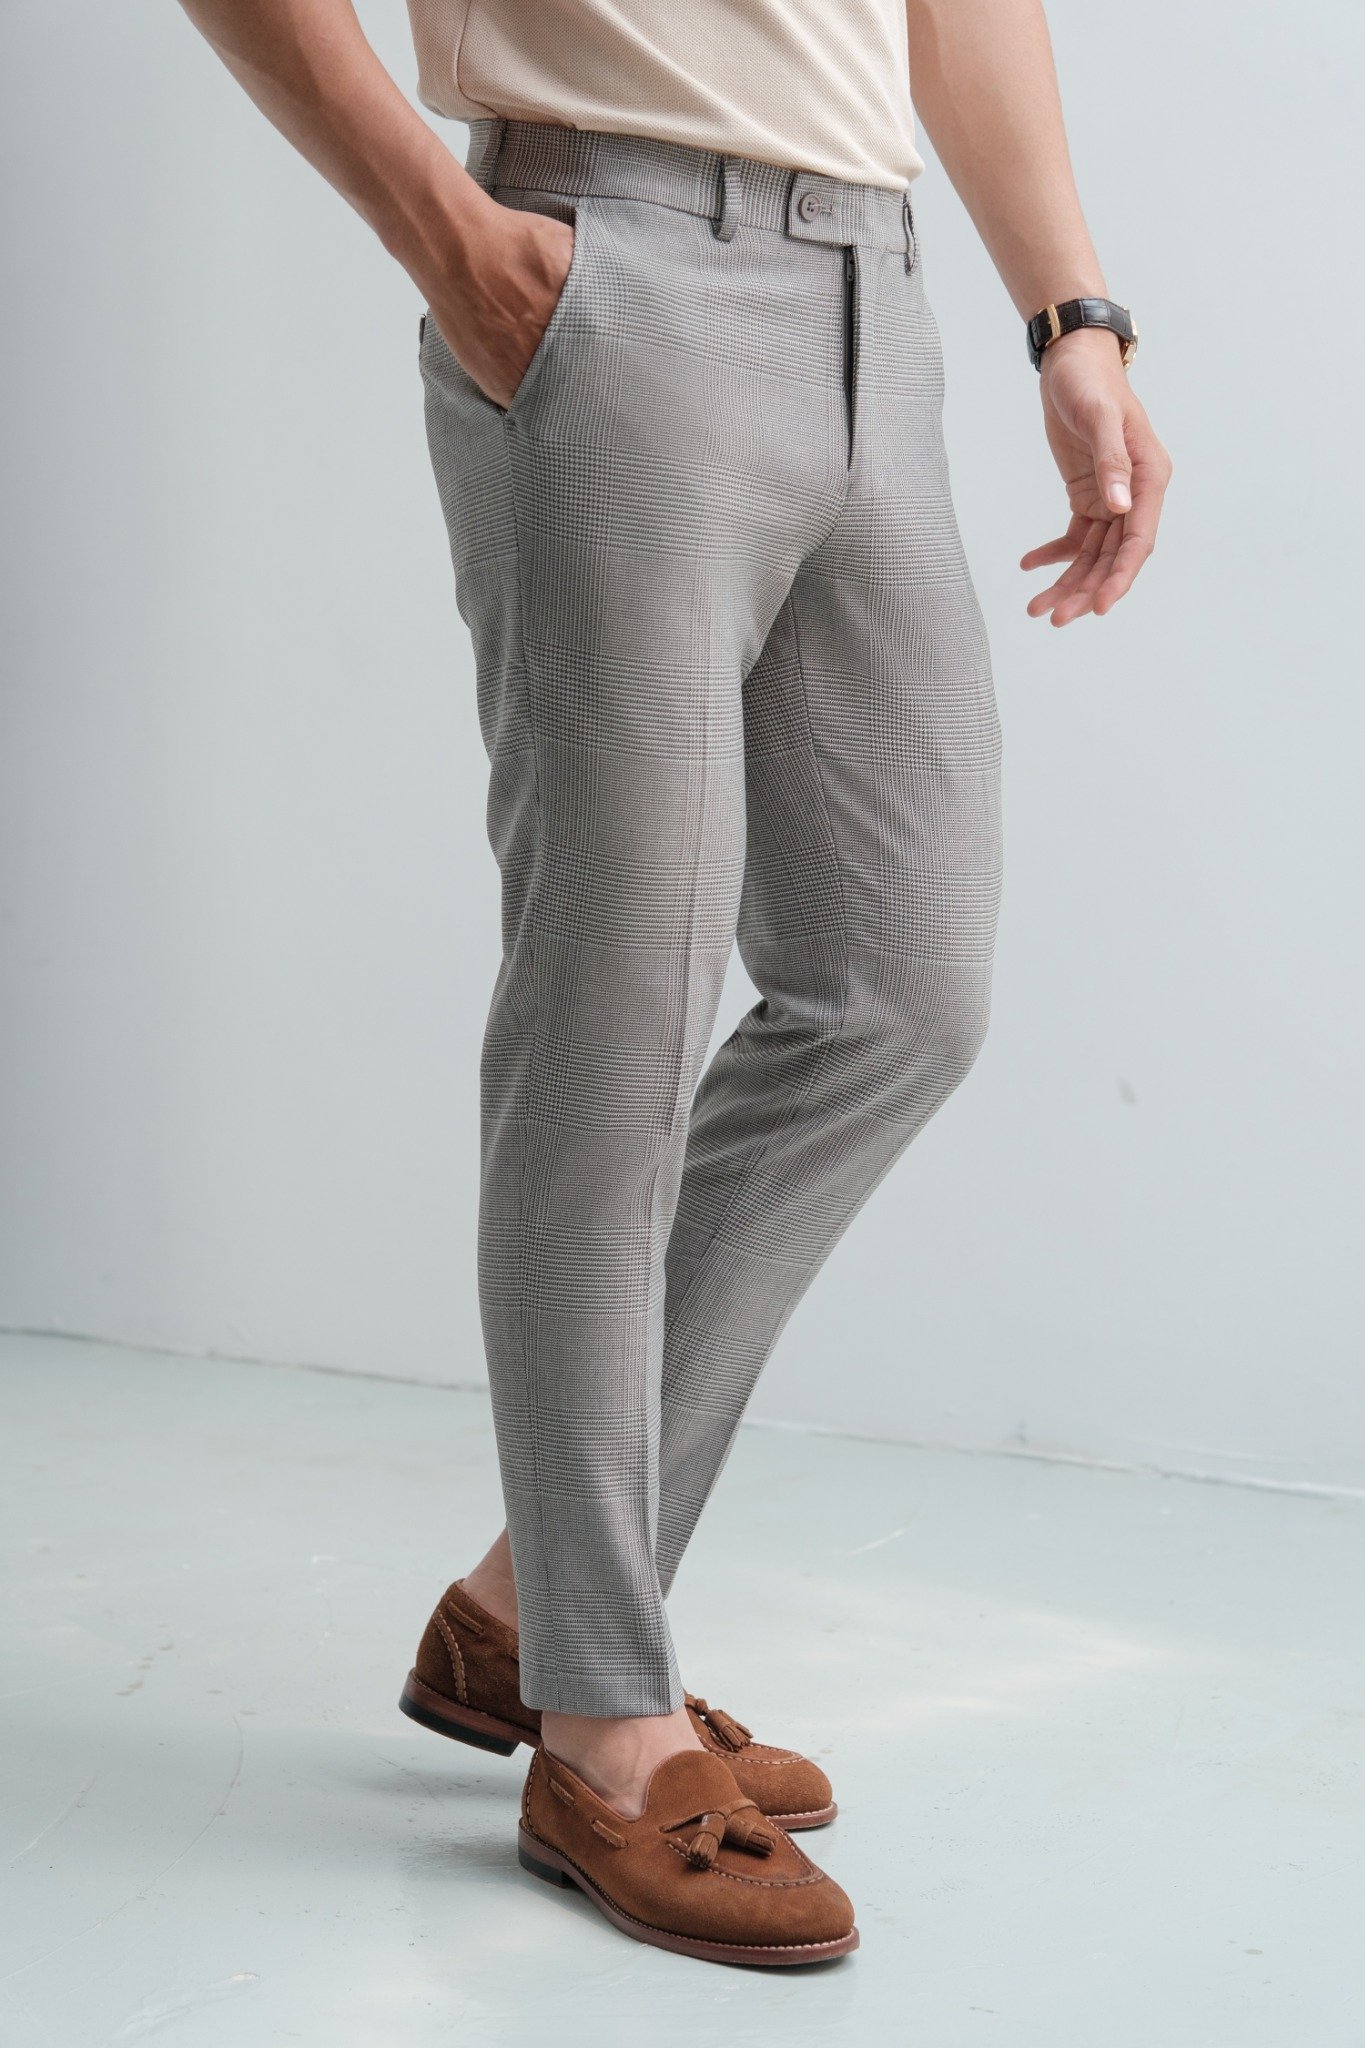 AG88 PREMIUM SLIMFIT “PRINCE OF WALE” CHECKED TROUSERS - GREY